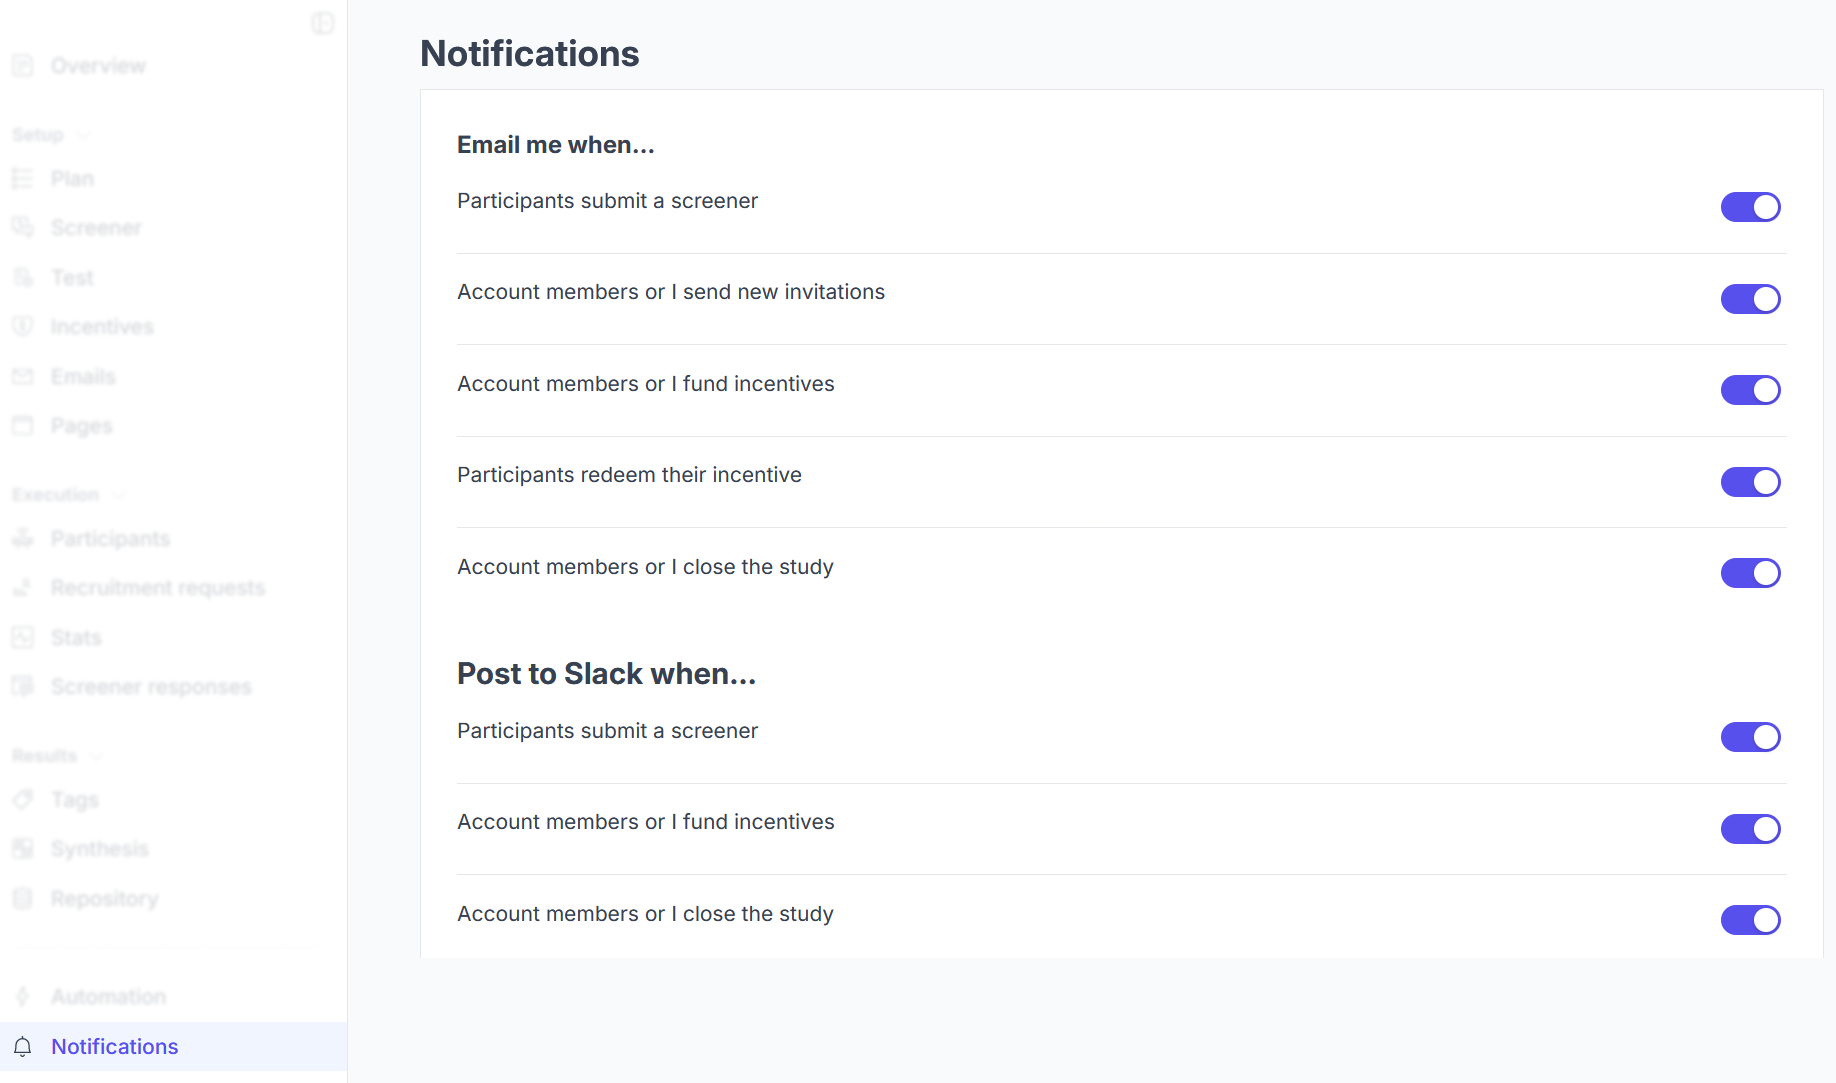 Unmoderated notifications view